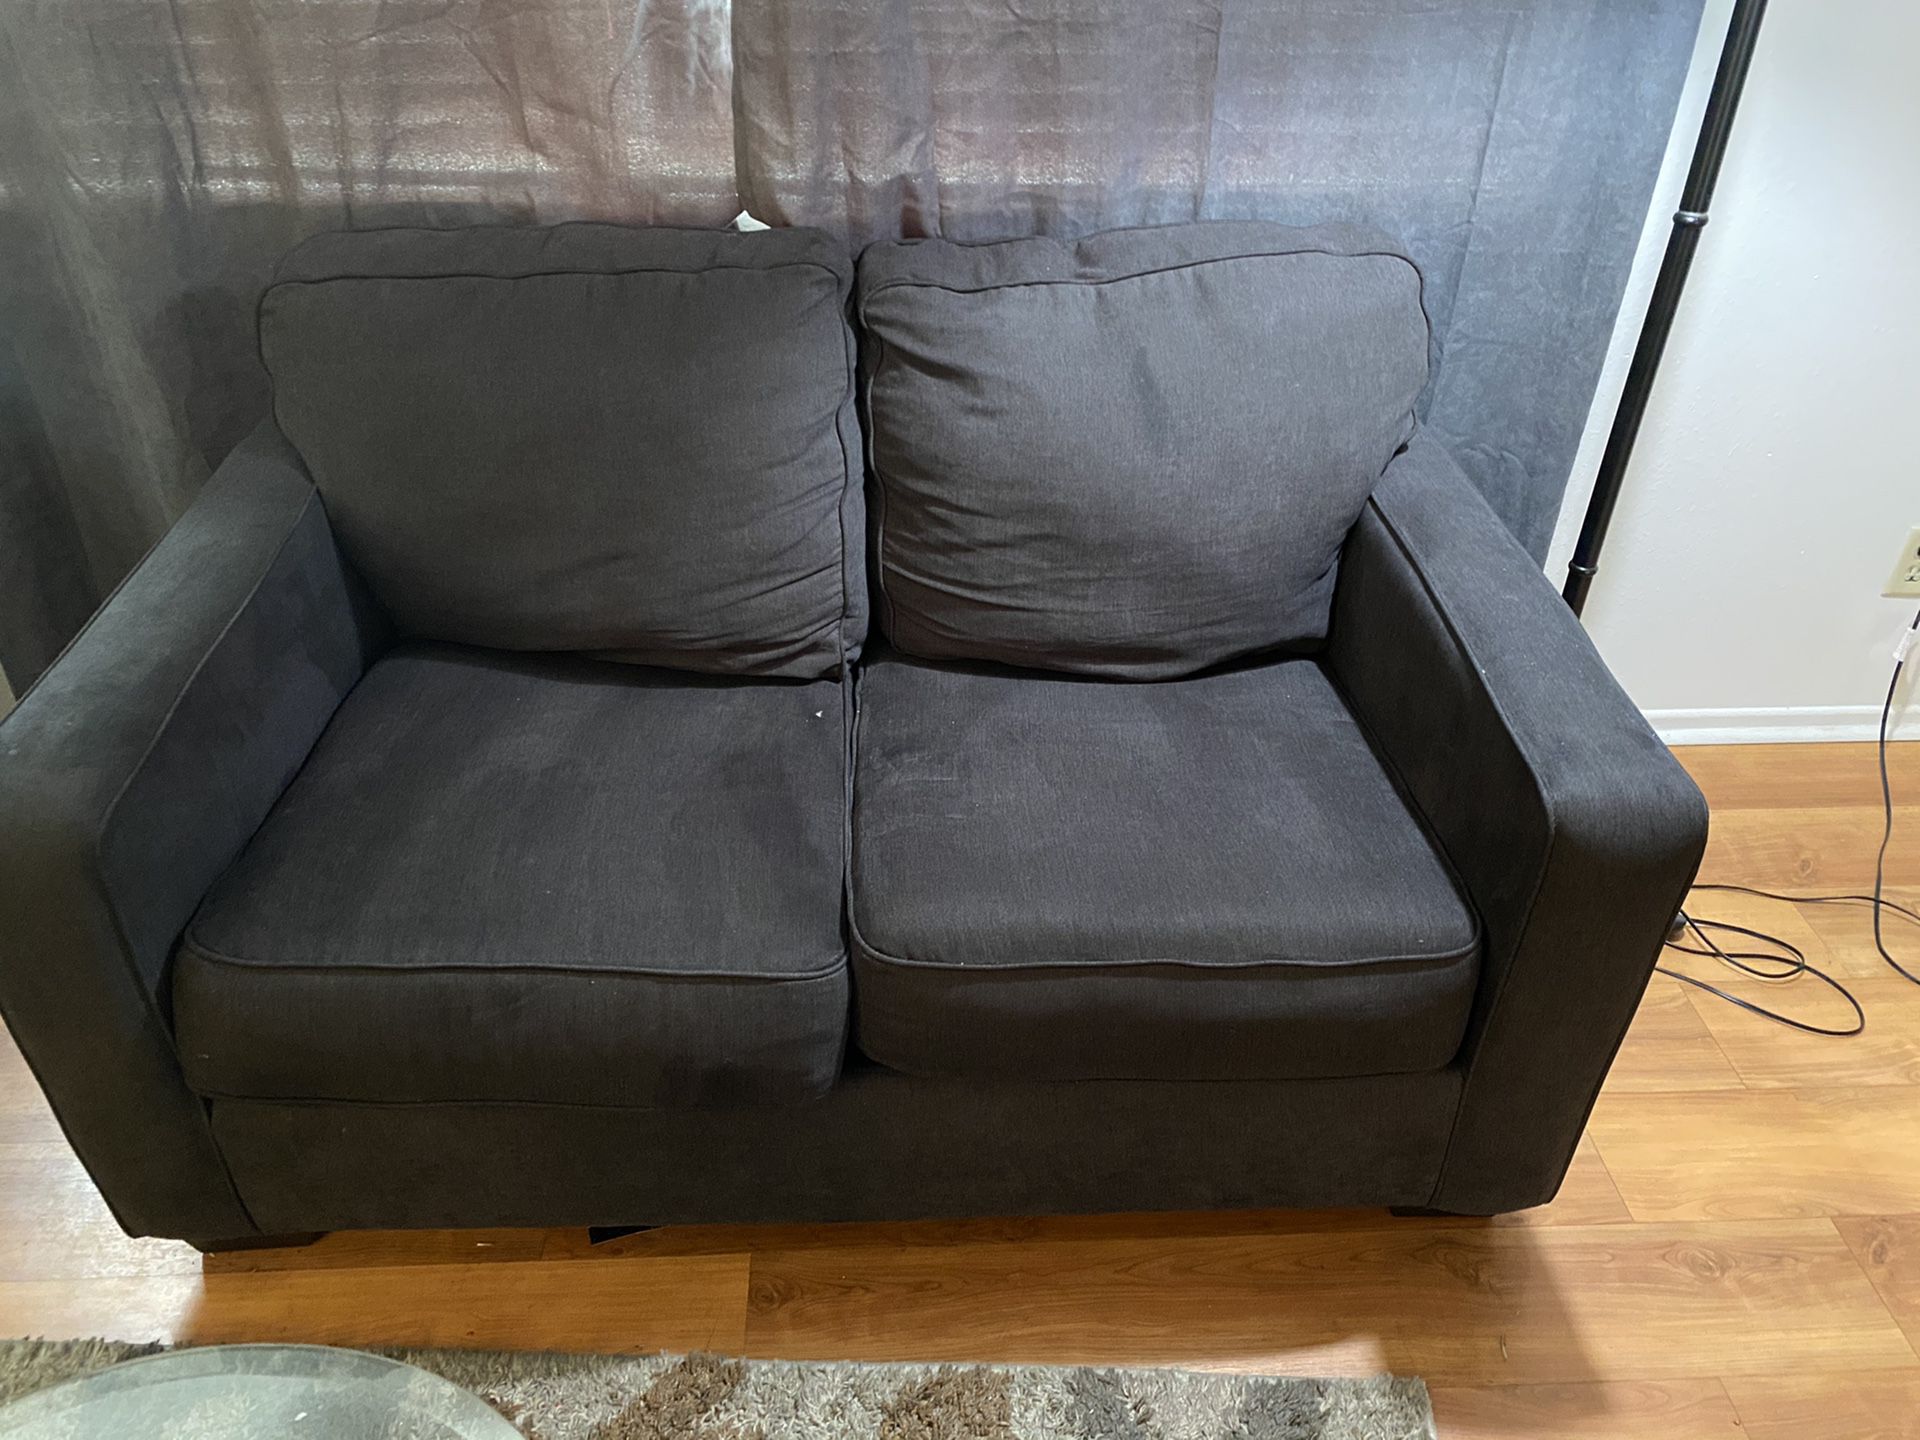 Grey 2 piece love seat and 3 seat couch.